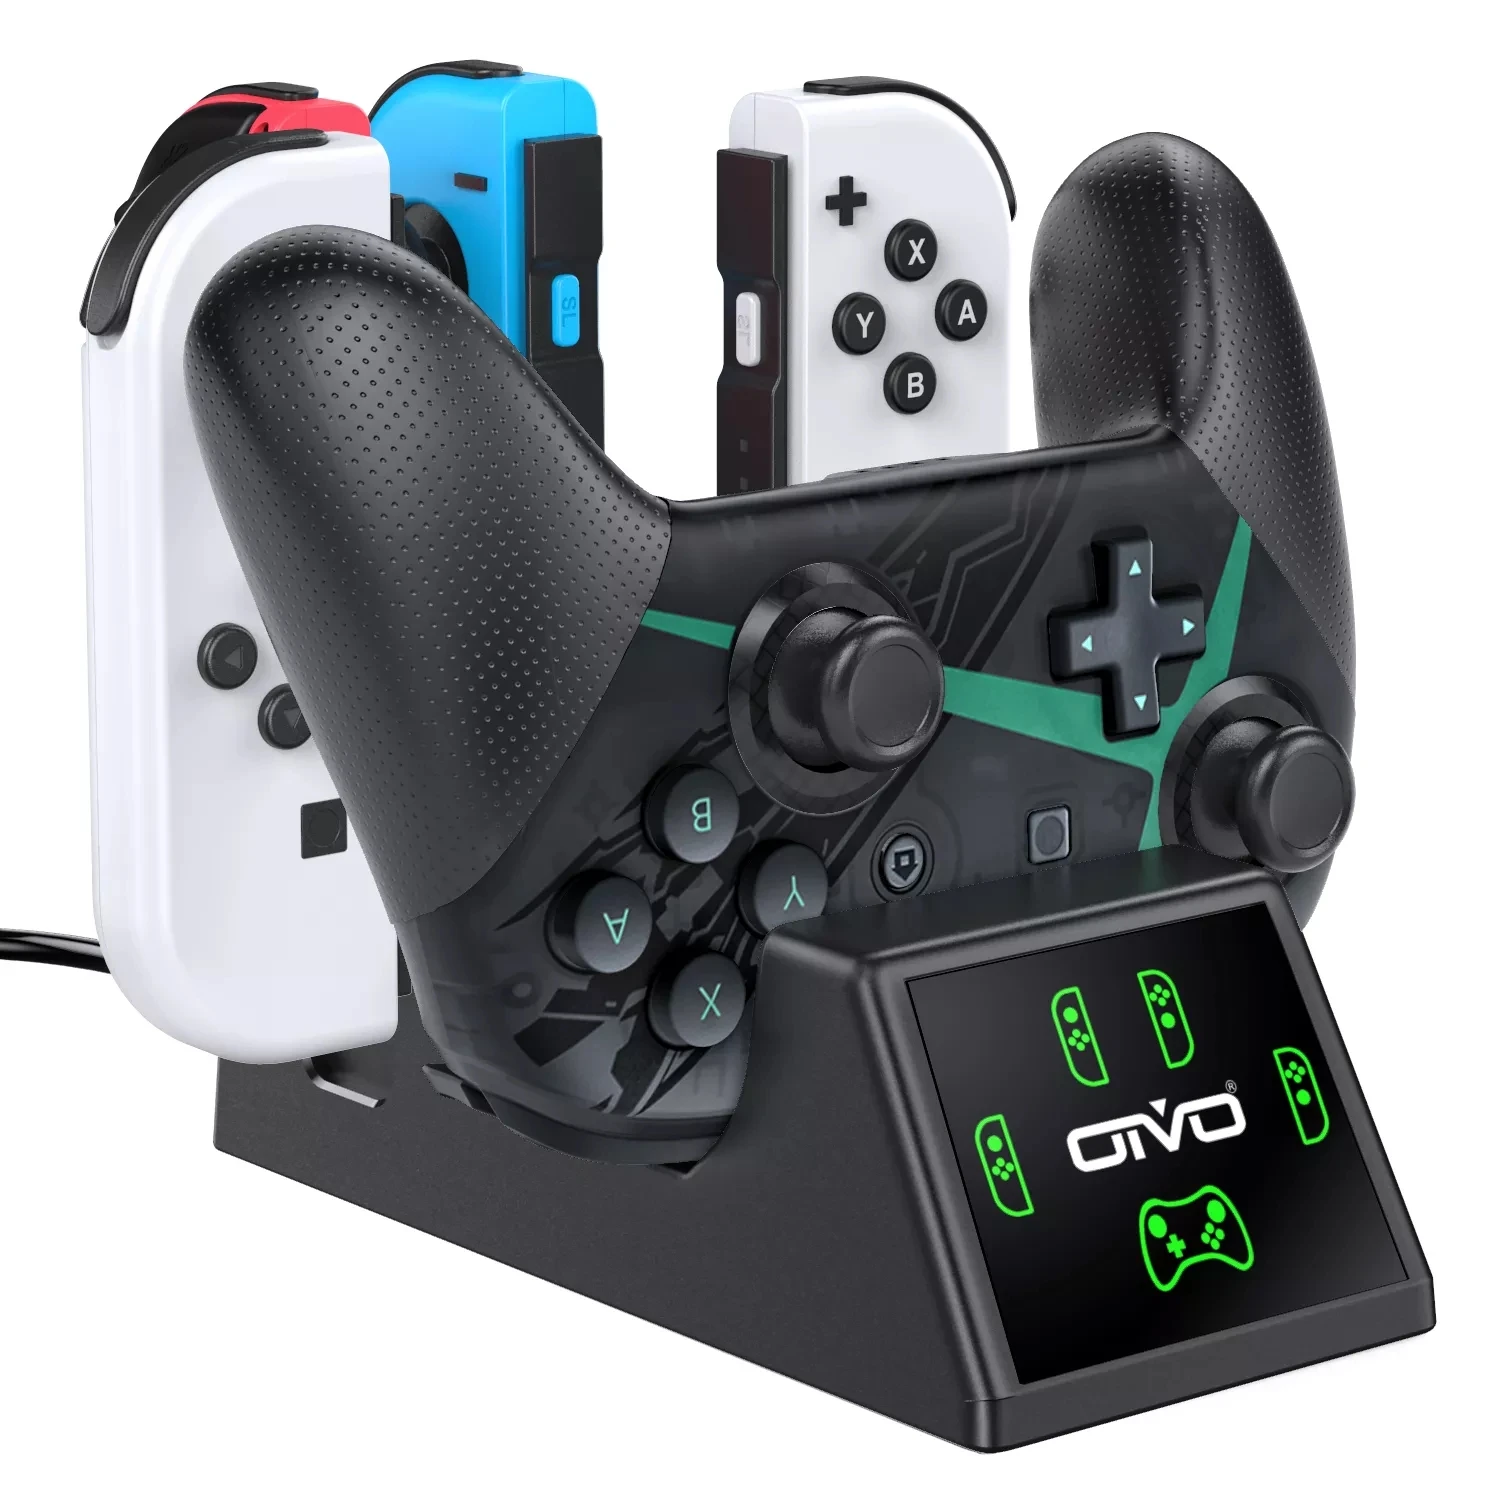 

New 5 in 1 Controller Charging Dock Stand for Nintend Switch Pro & 4 Joypad Charger Charging Station with LED Indicators